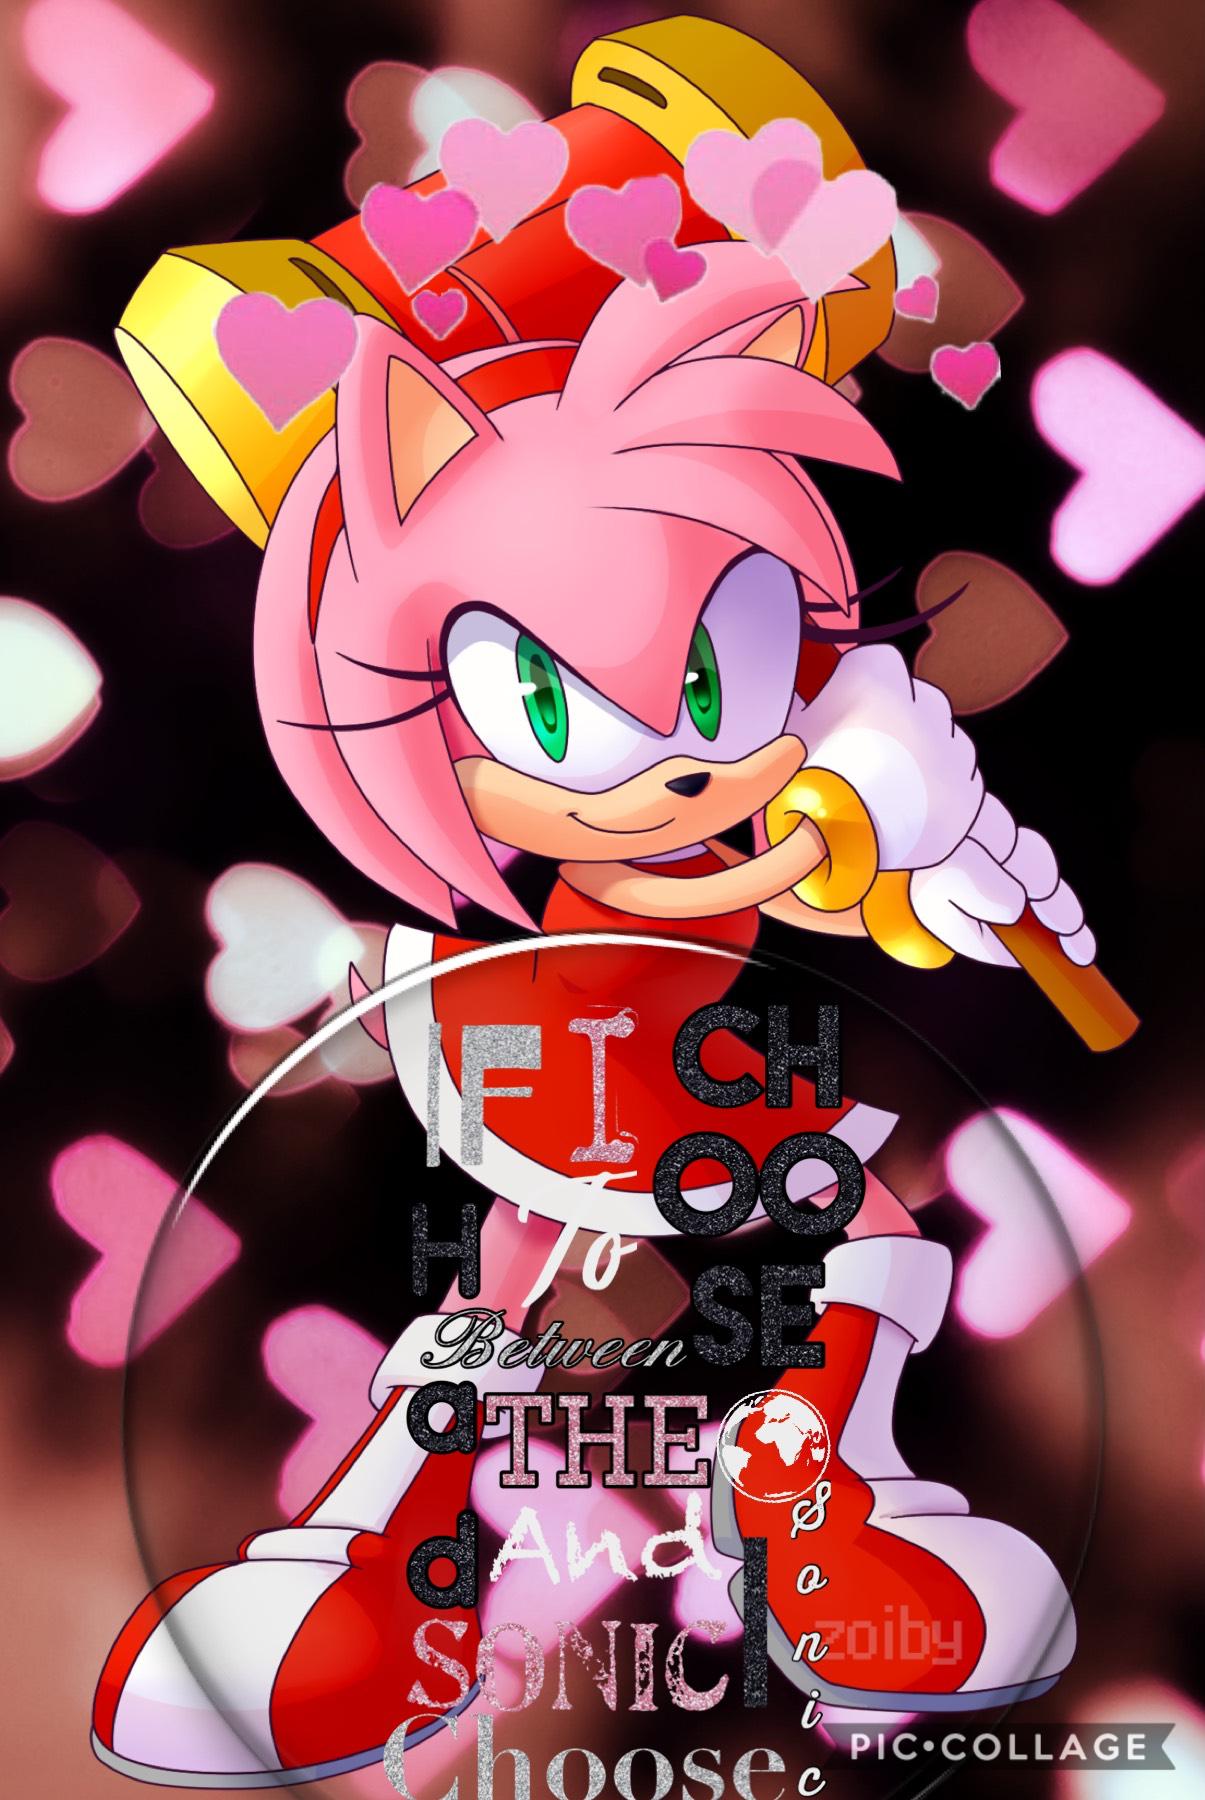 “If I had to choose between the world and sonic I would choose sonic” -Amy rose